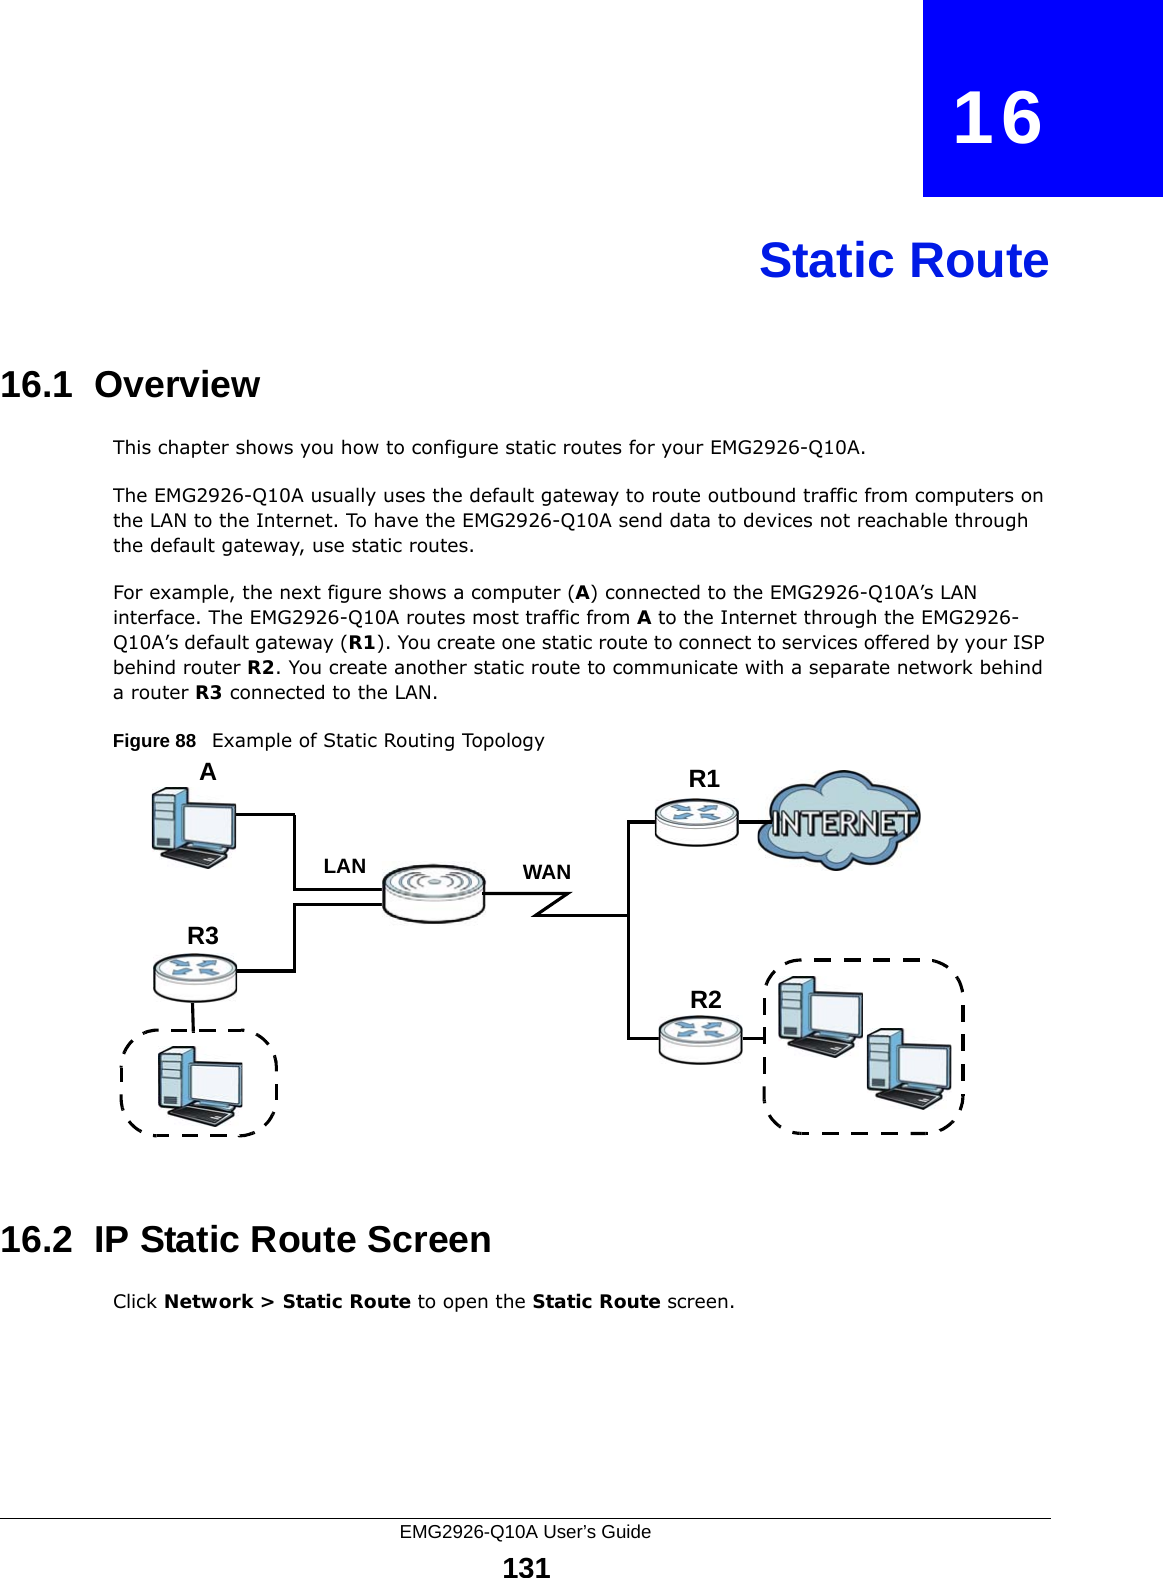 EMG2926-Q10A User’s Guide131CHAPTER   16Static Route16.1  Overview   This chapter shows you how to configure static routes for your EMG2926-Q10A.The EMG2926-Q10A usually uses the default gateway to route outbound traffic from computers on the LAN to the Internet. To have the EMG2926-Q10A send data to devices not reachable through the default gateway, use static routes.For example, the next figure shows a computer (A) connected to the EMG2926-Q10A’s LAN interface. The EMG2926-Q10A routes most traffic from A to the Internet through the EMG2926-Q10A’s default gateway (R1). You create one static route to connect to services offered by your ISP behind router R2. You create another static route to communicate with a separate network behind a router R3 connected to the LAN.Figure 88   Example of Static Routing Topology16.2  IP Static Route Screen Click Network &gt; Static Route to open the Static Route screen. WANR1R2AR3LAN